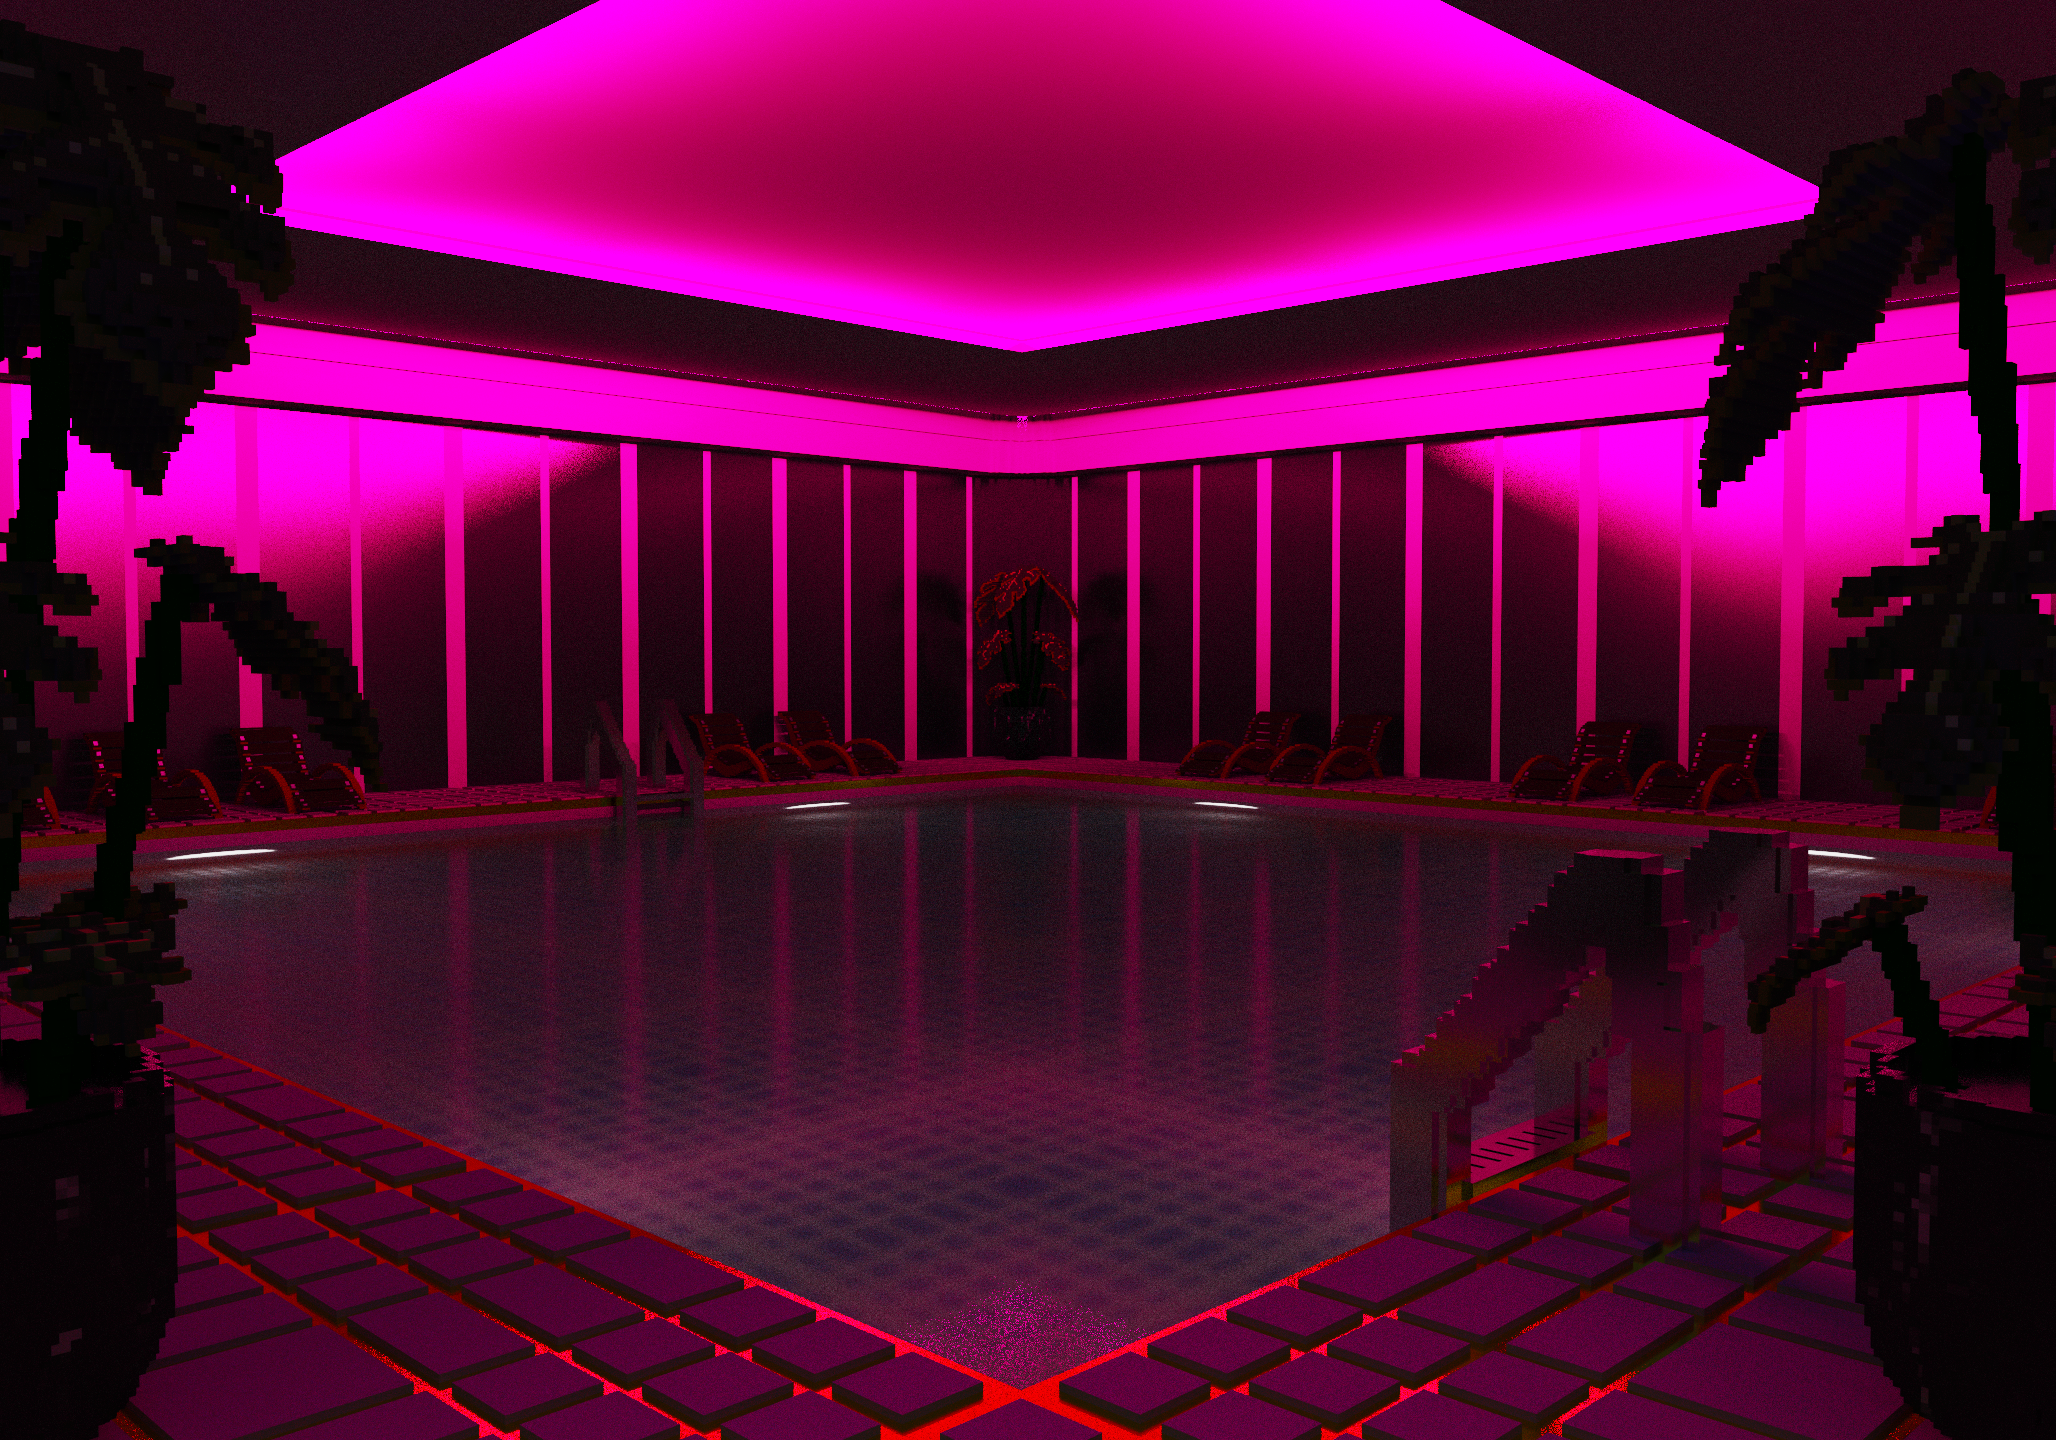 Neon Poolside Liminal Space: LiminalSpace